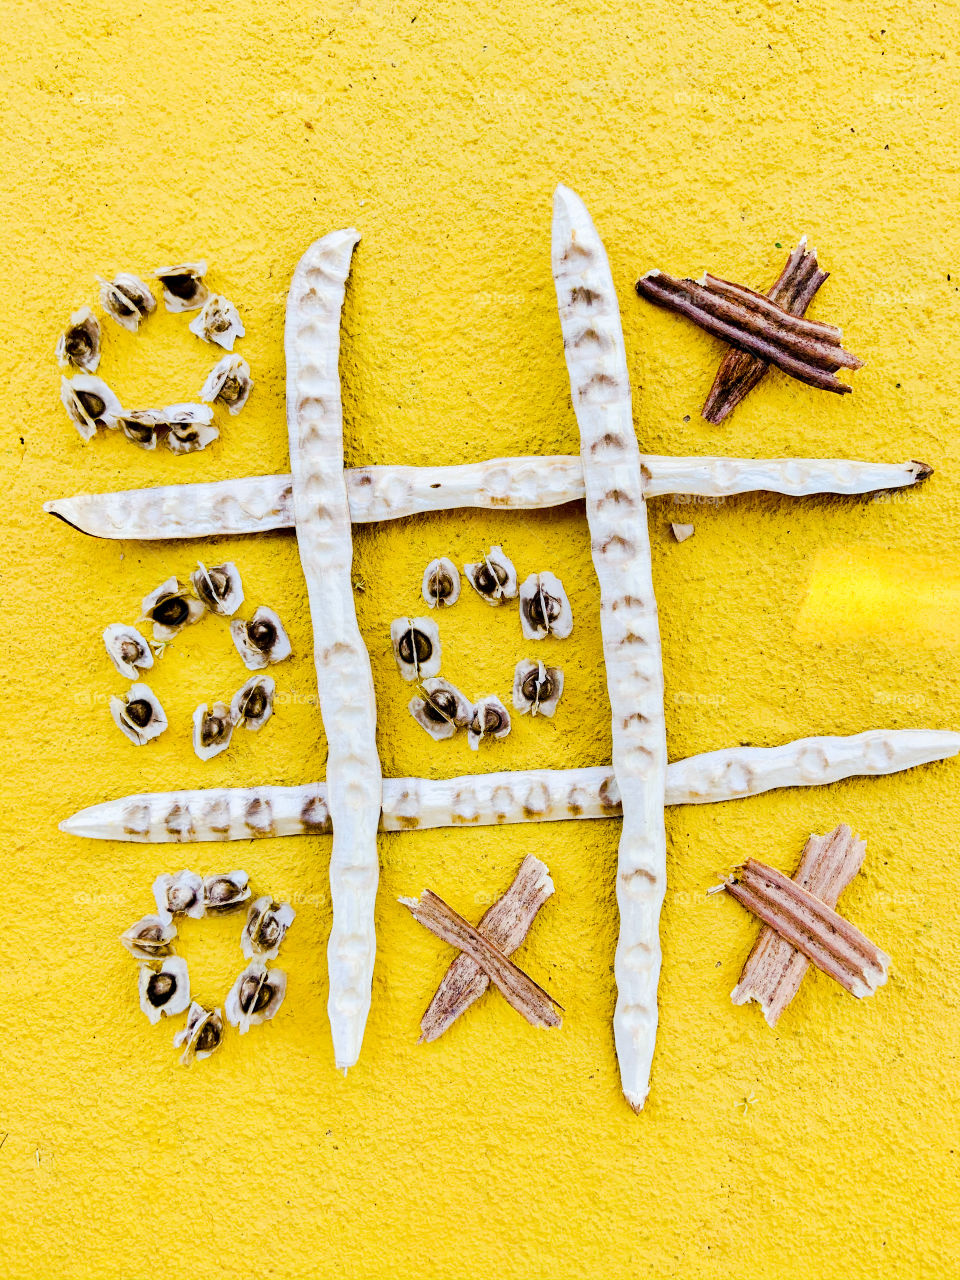 Playing games with seeds in a yellow background 